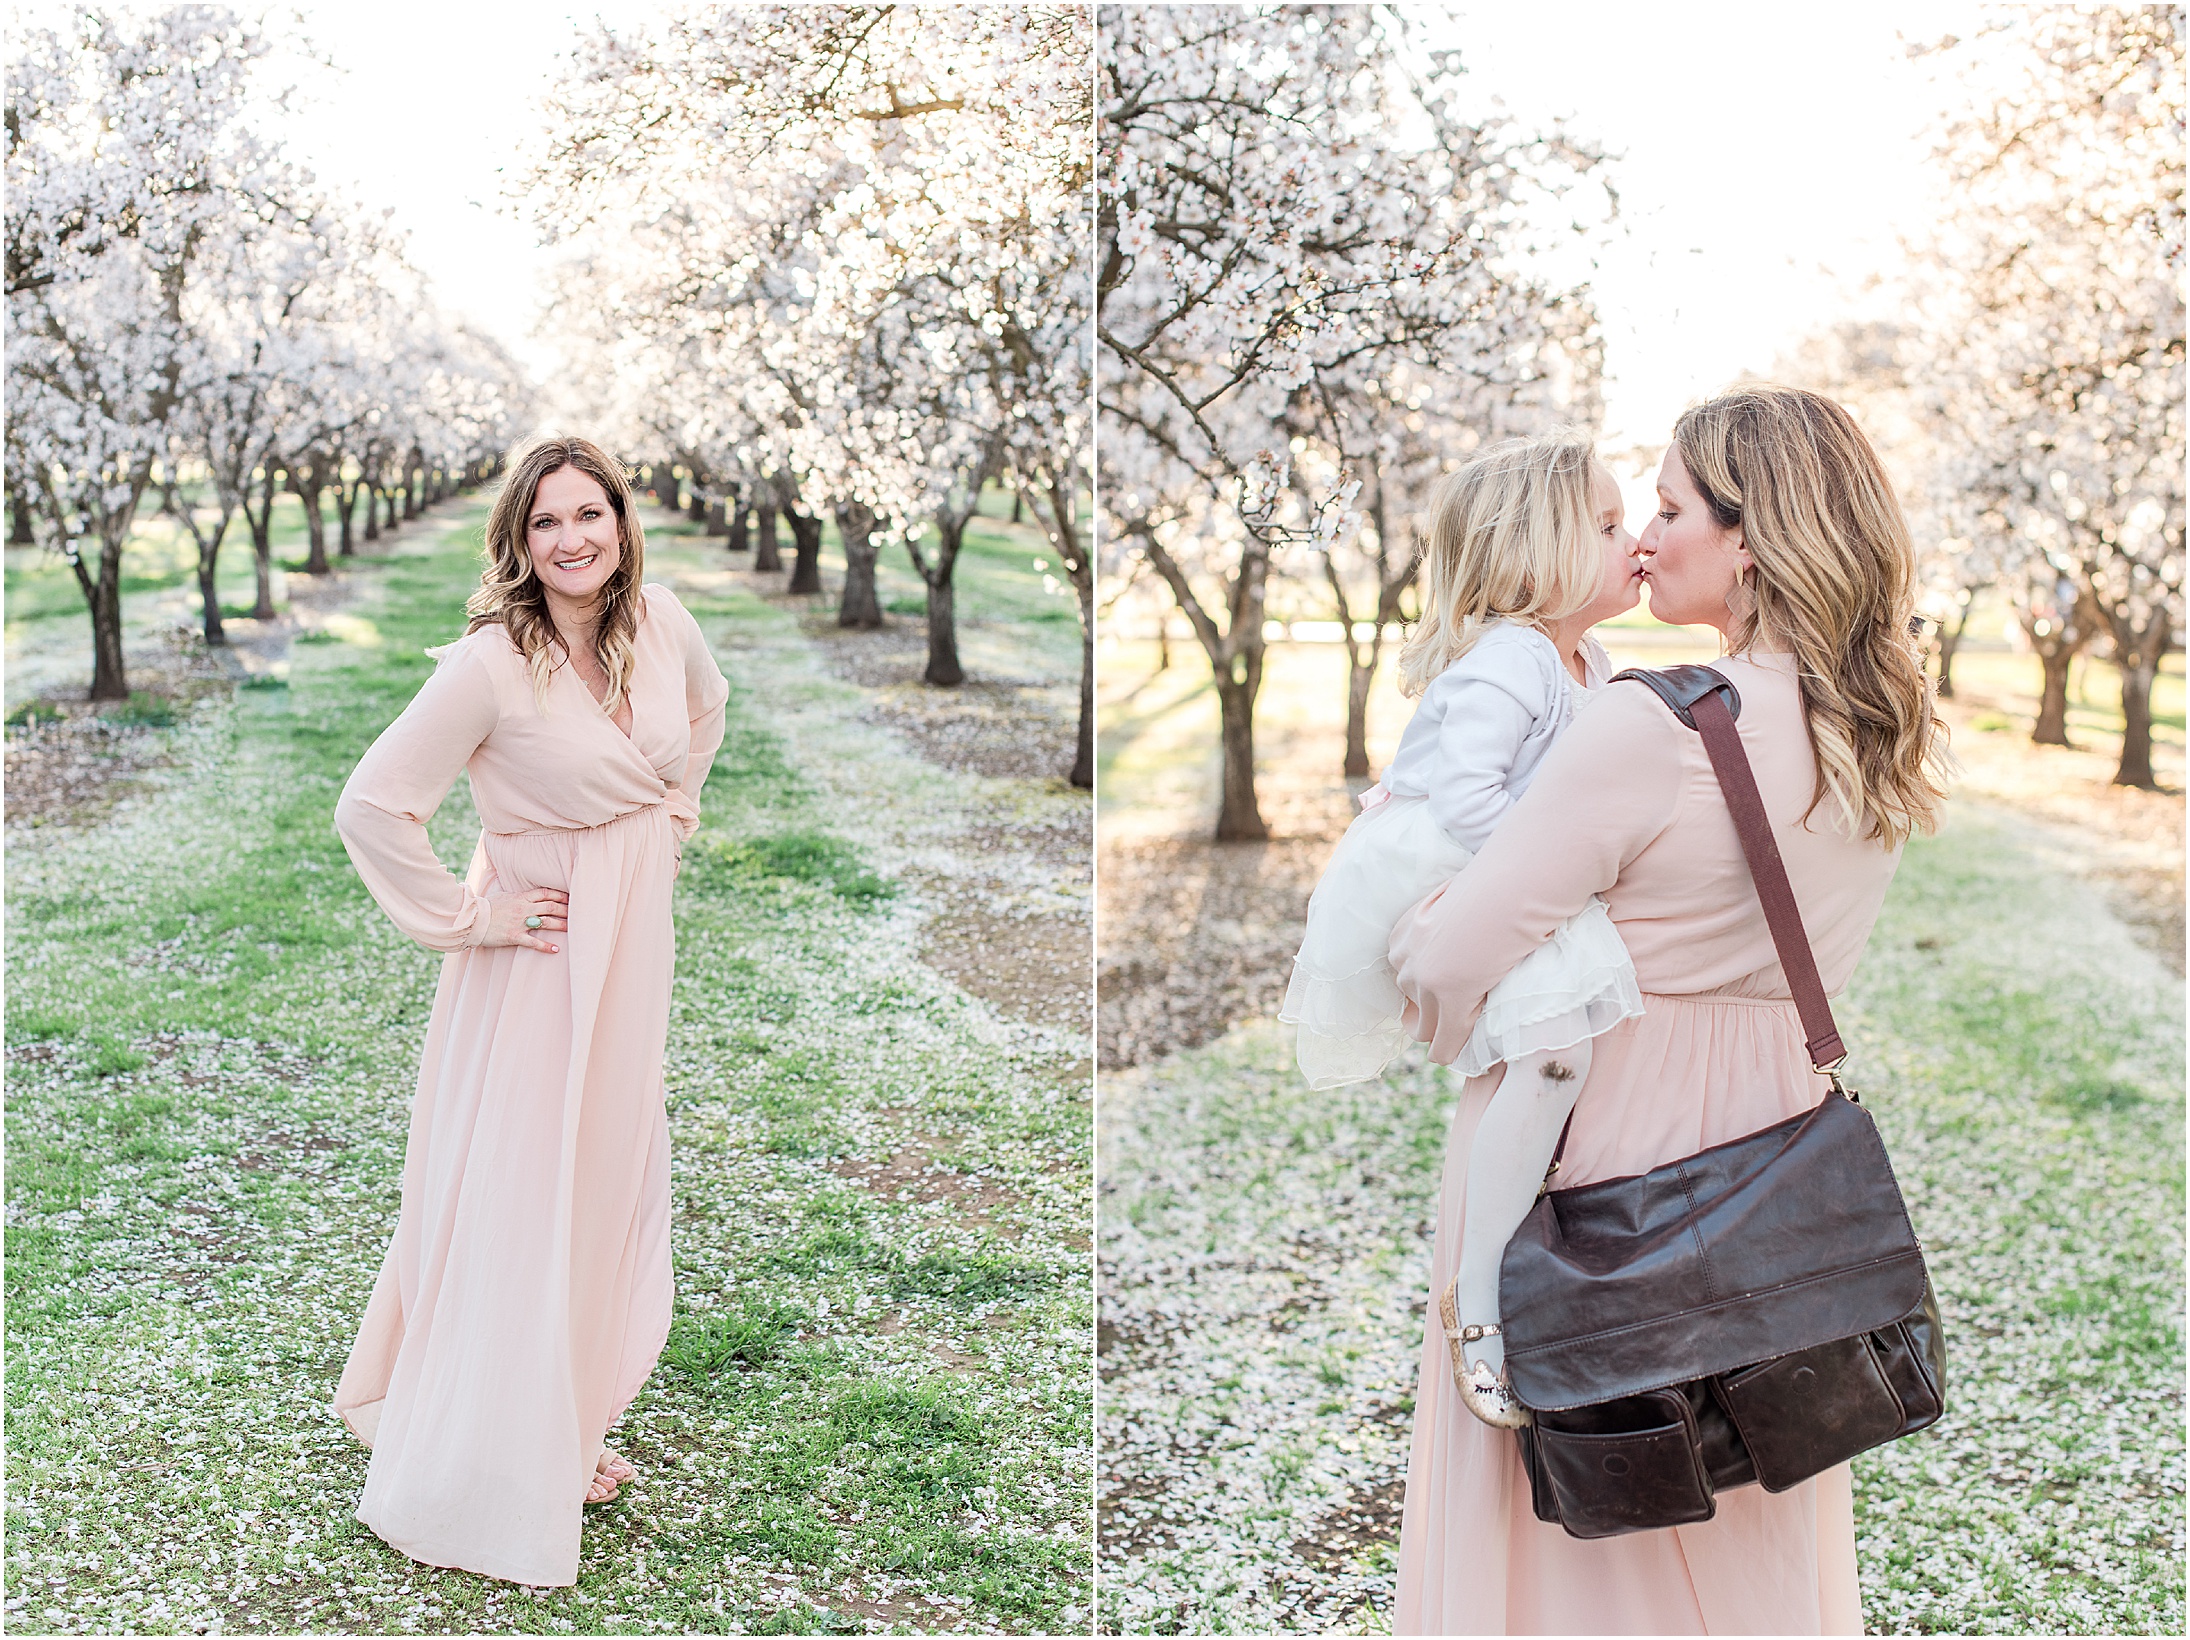 Spring Almond Blossoms Family Portraits Neutrals and Pink Floral Bouquet,